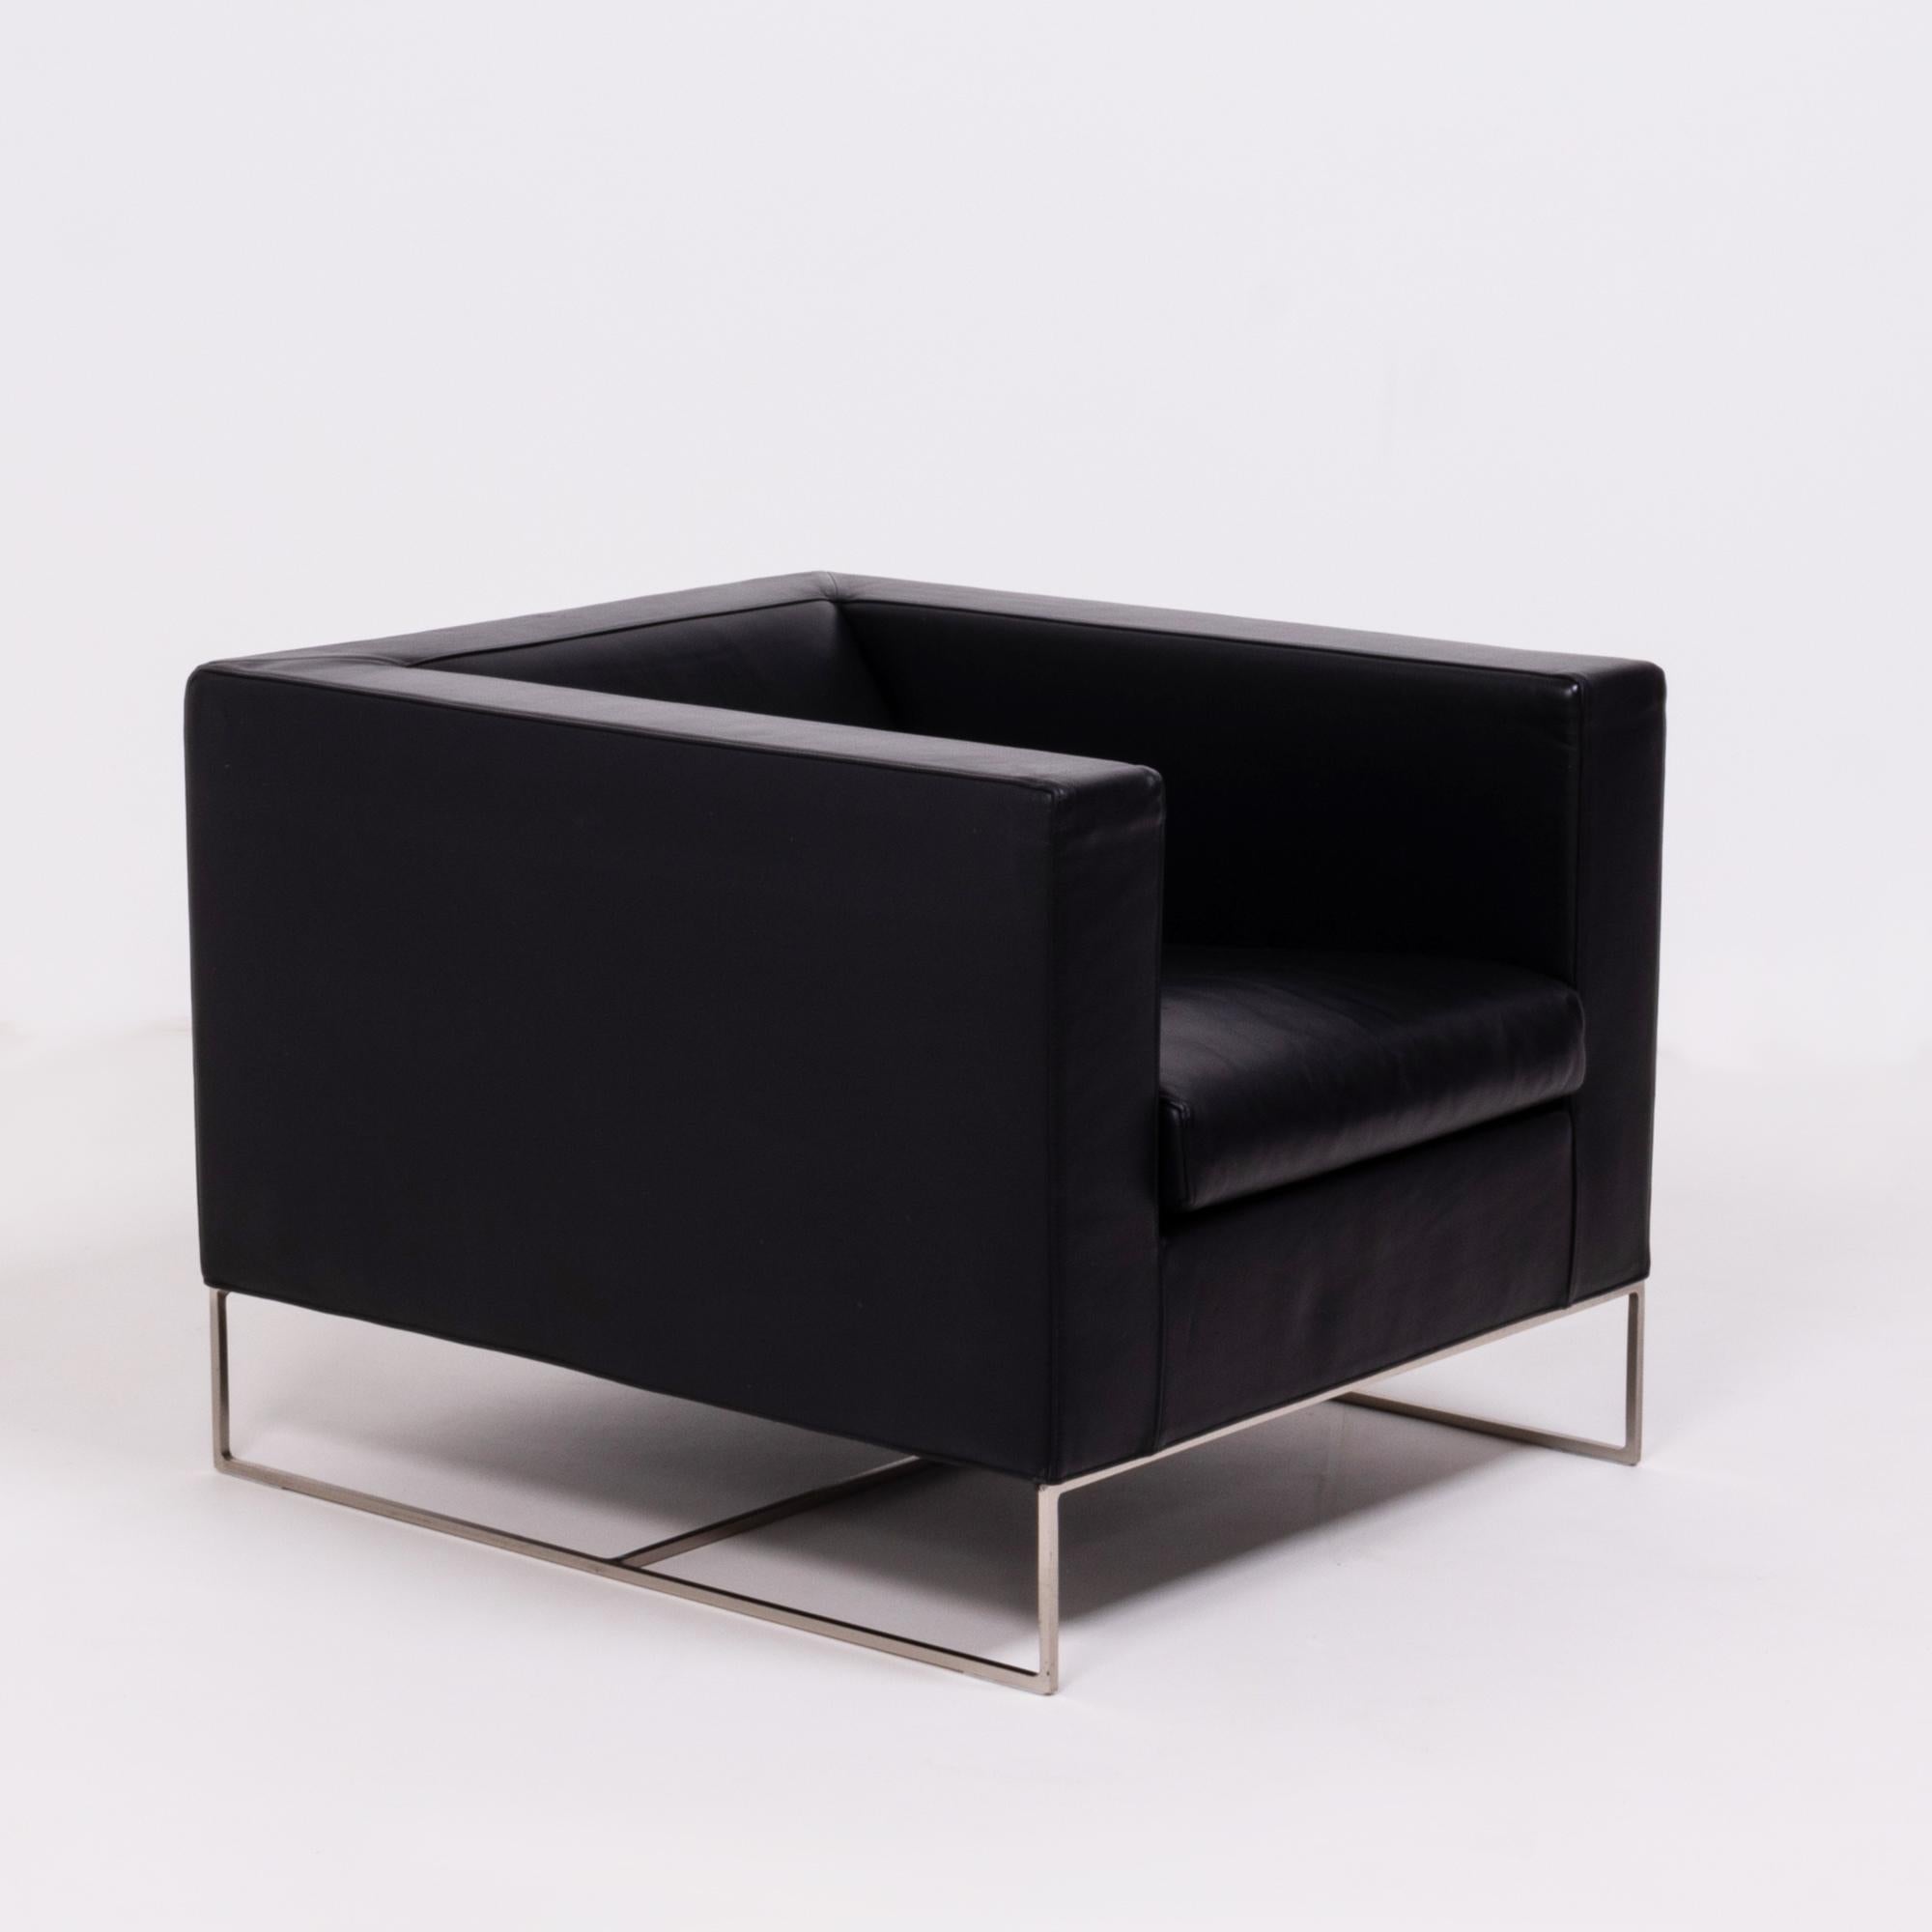 Designed by Rodolfo Dordoni for Minotti, the Klee armchair has a sleek, modern silhouette.

The chair has a bold cube-like shape, contrasted by a finer, geometric base constructed from handworked metal.

Fully upholstered in black leather, the